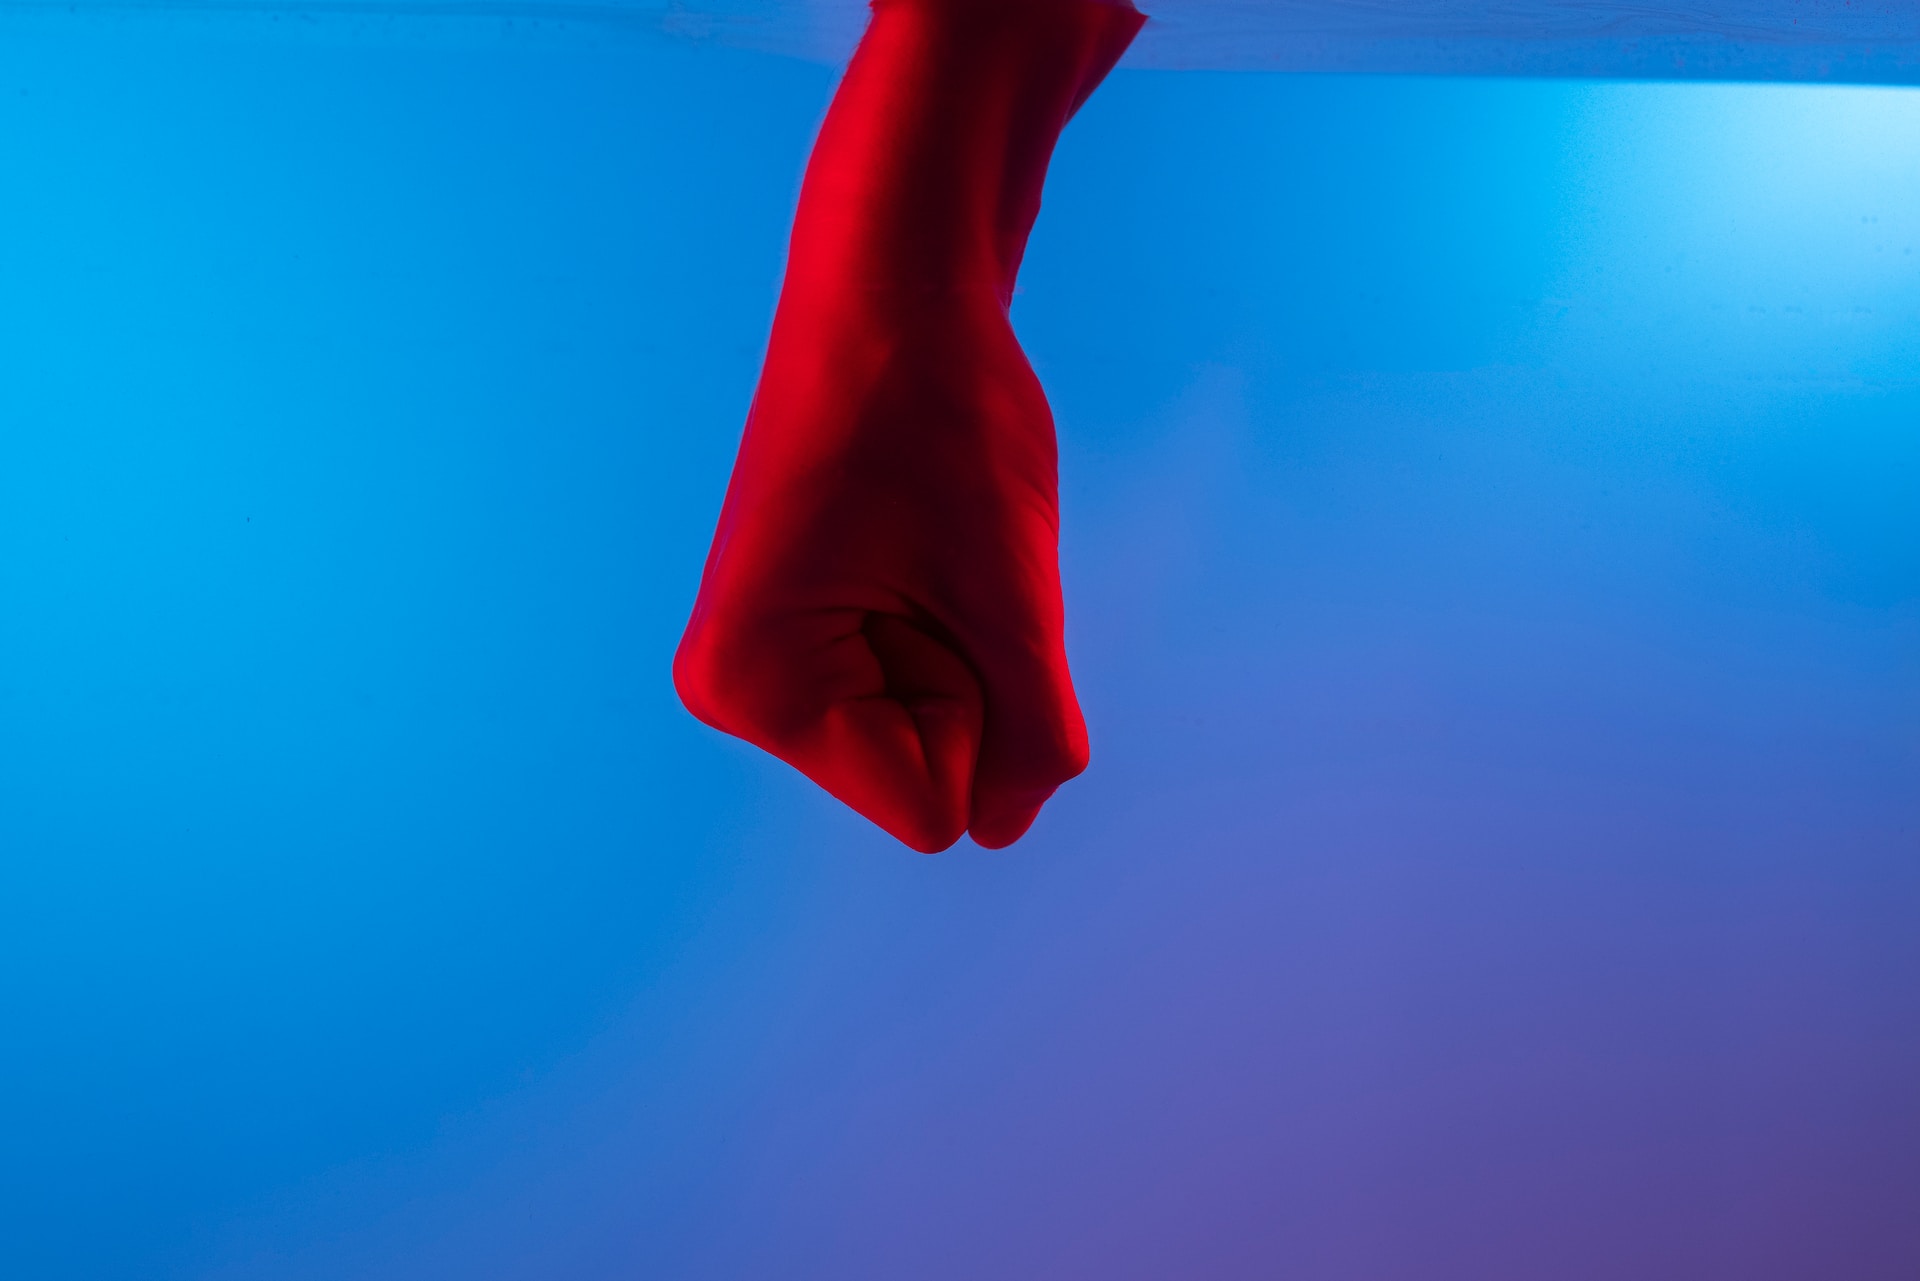 A closed fist against a blue background